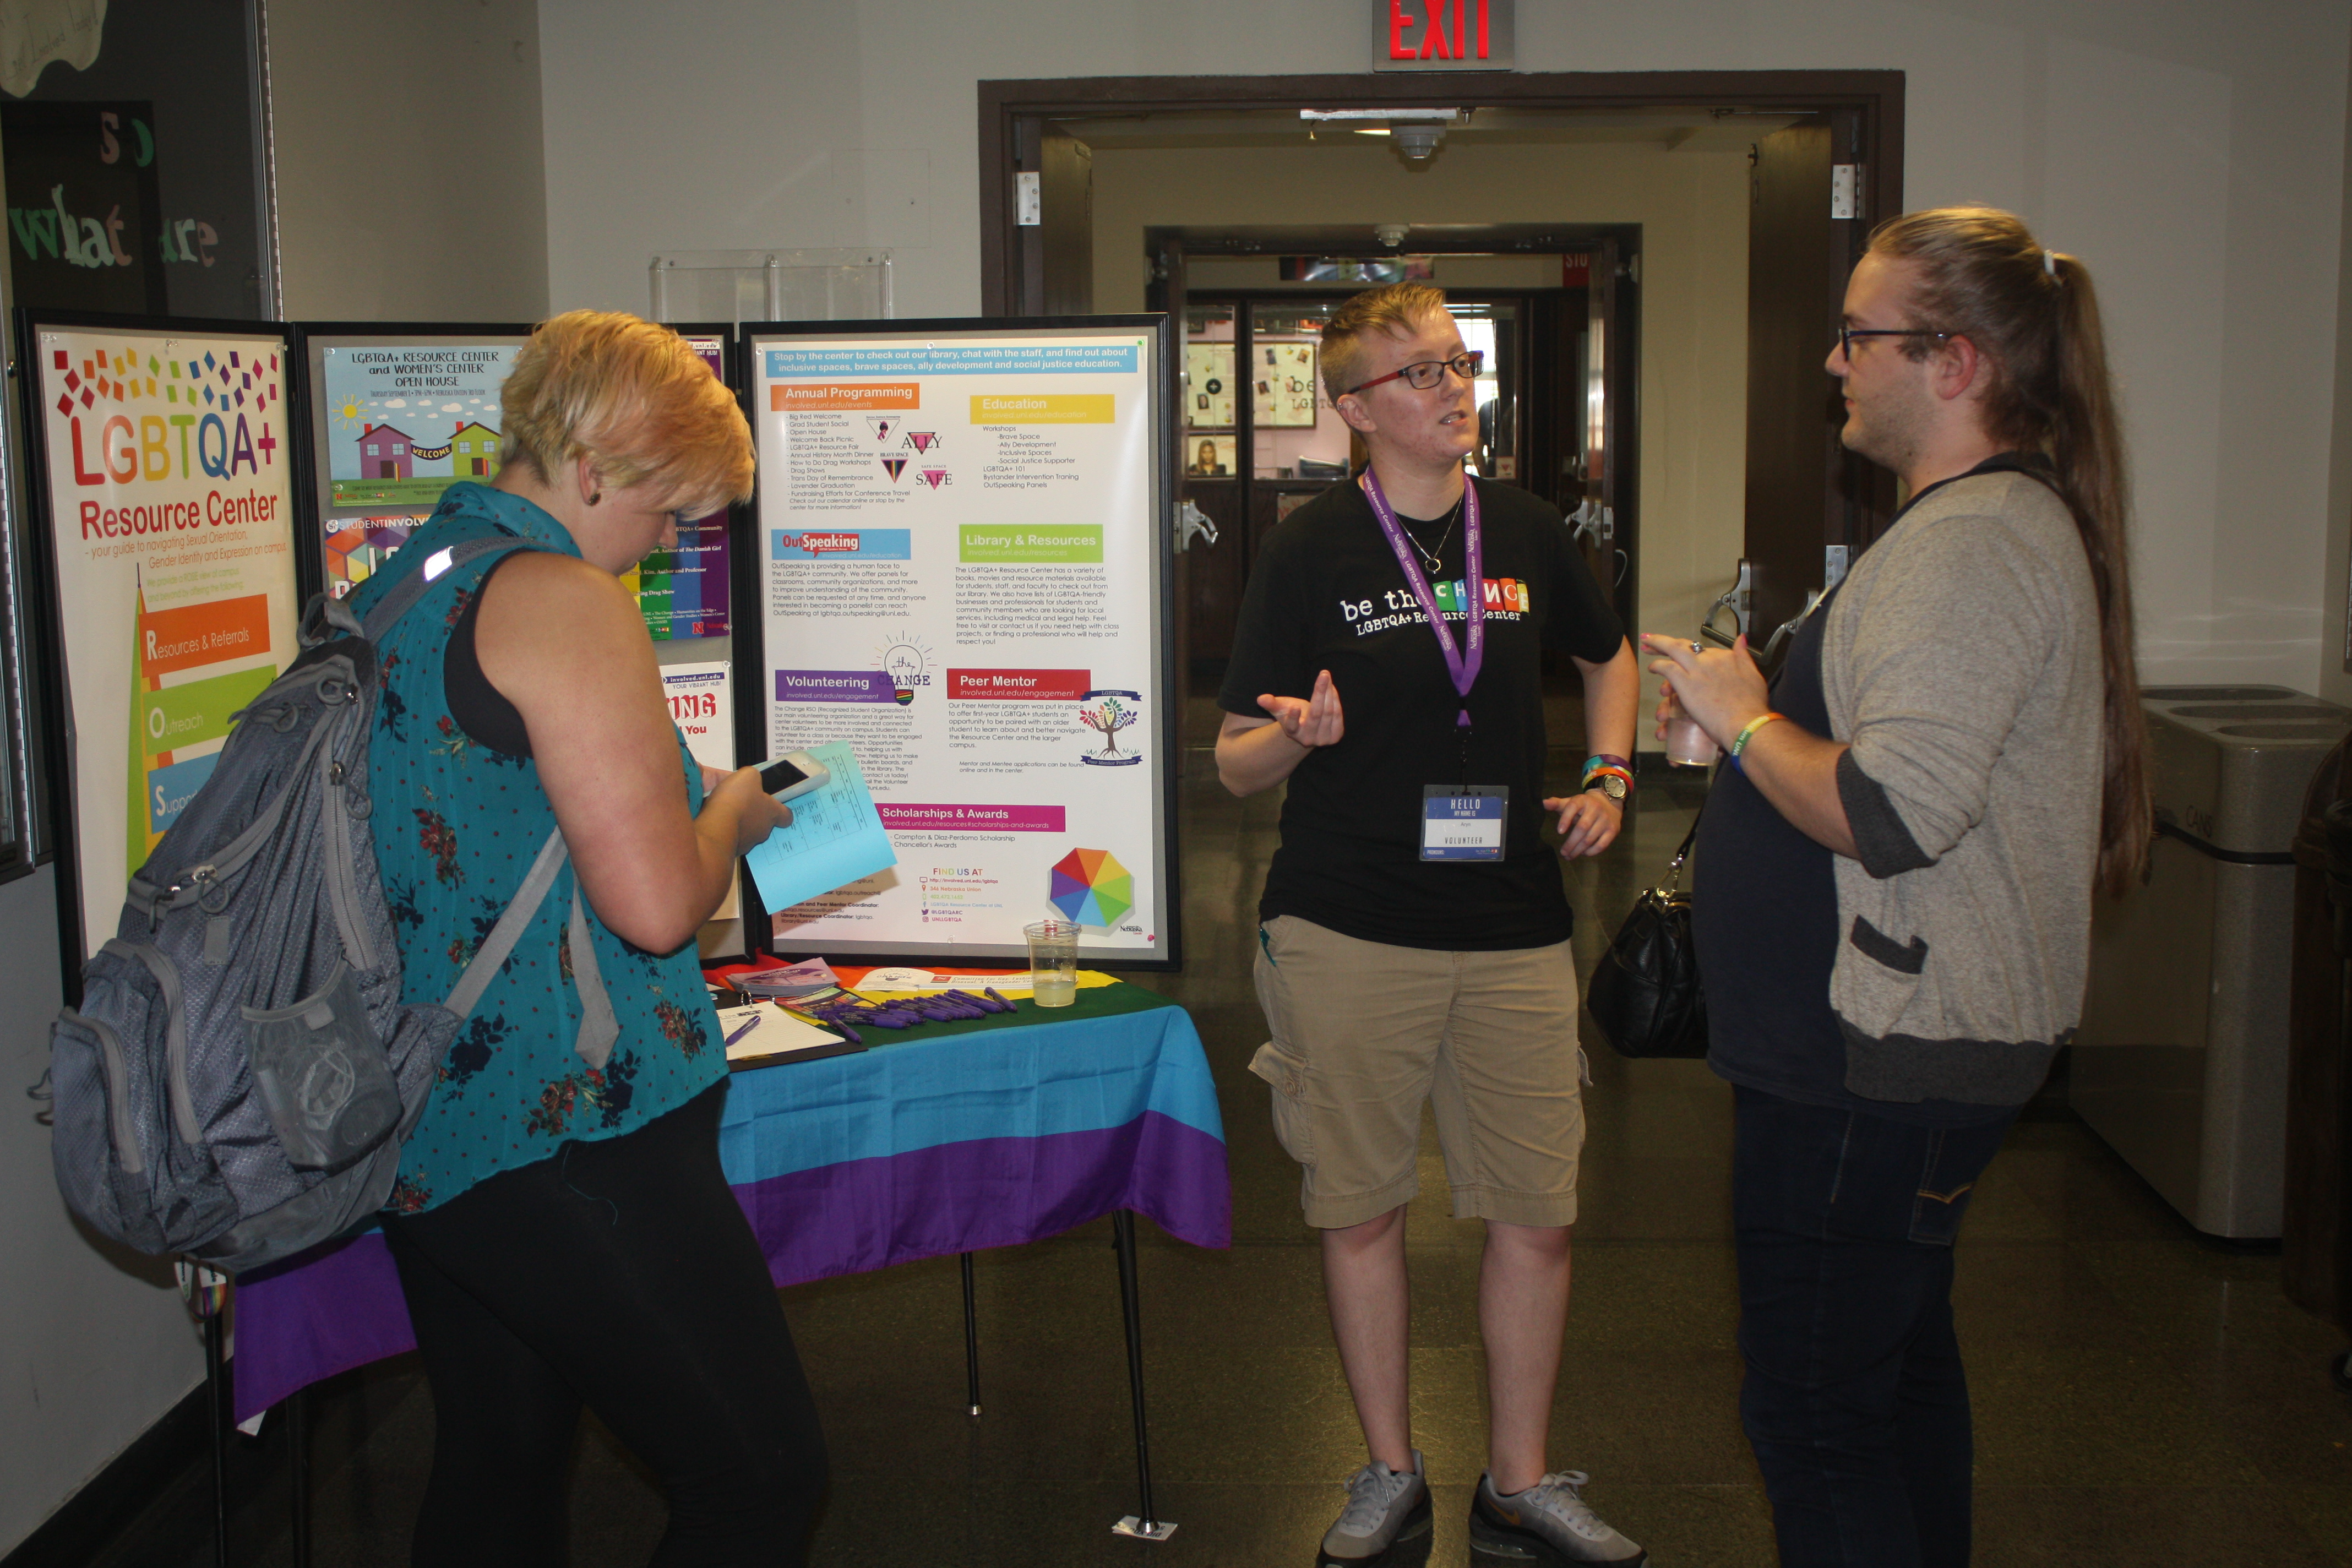 Students discuss services offered by the LGBTQA+ Resource Center.